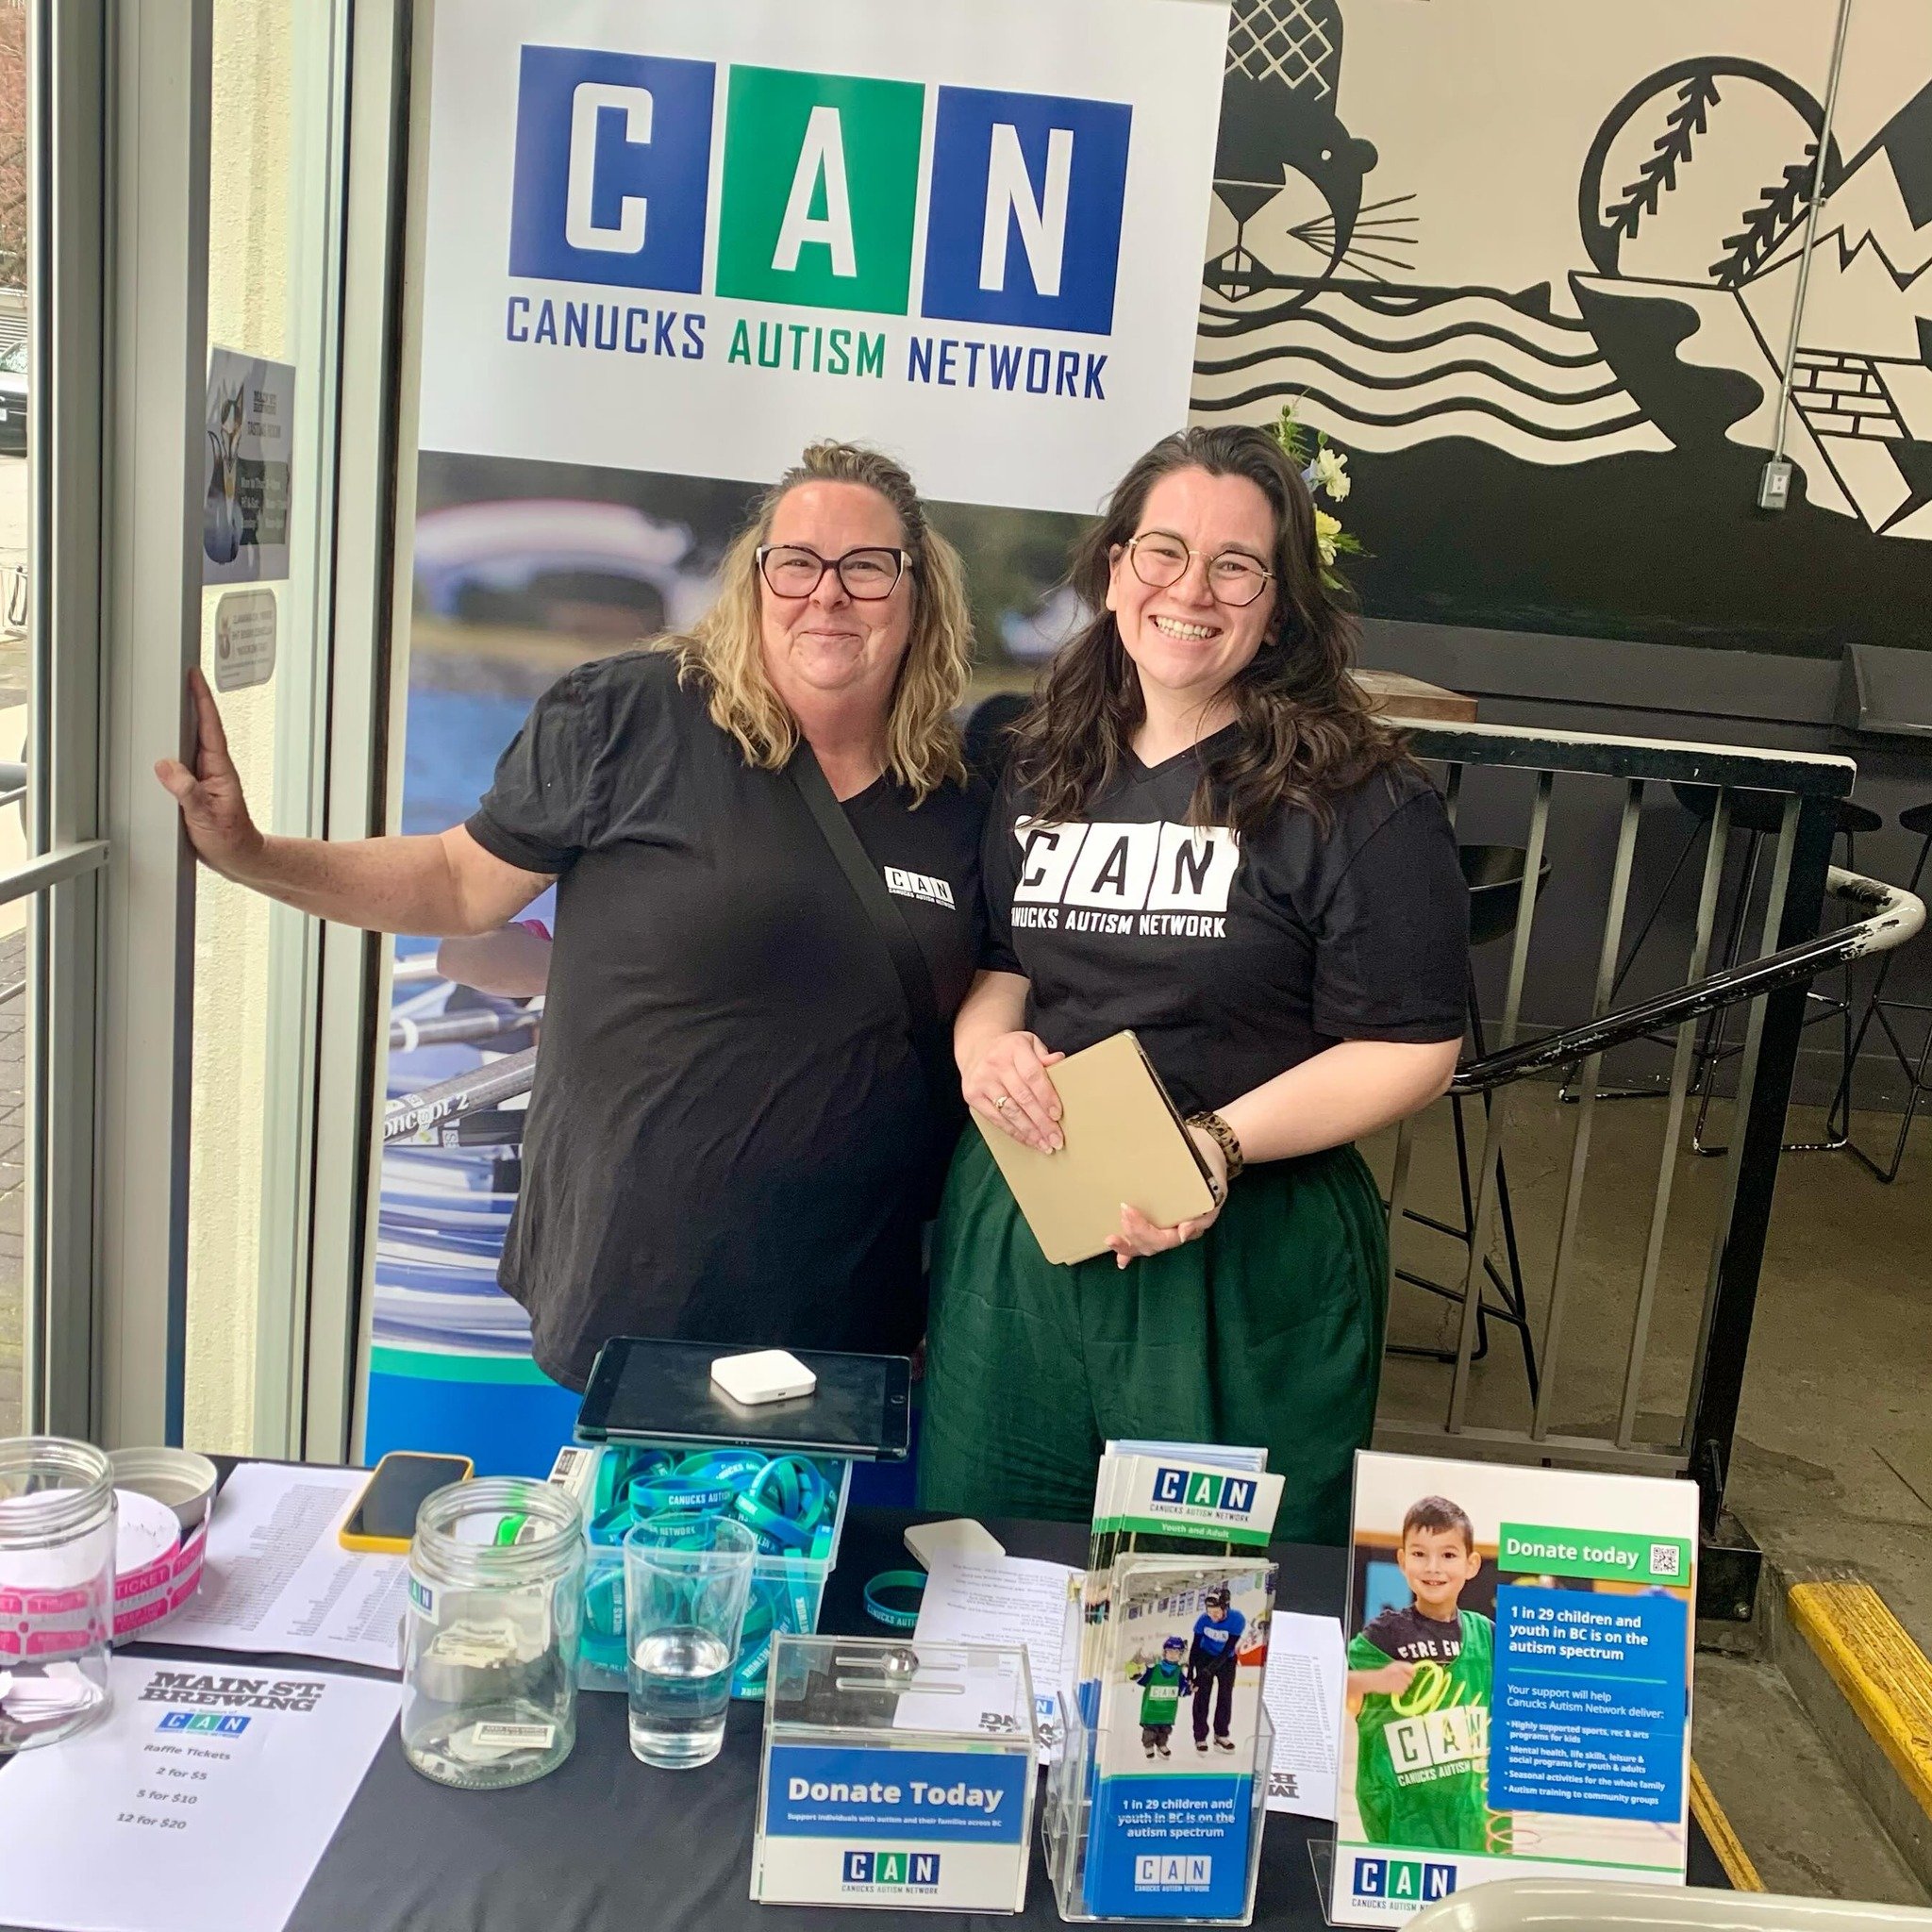 CAN-DO ATTITUDE

A big CHEERS! to everyone who came out, donated prizes and showed their love during our gala GLOW fundraiser for the @canucksautism Network (CAN) last week at Main St.!

Thanks to all of your support, we were able to raise more than 